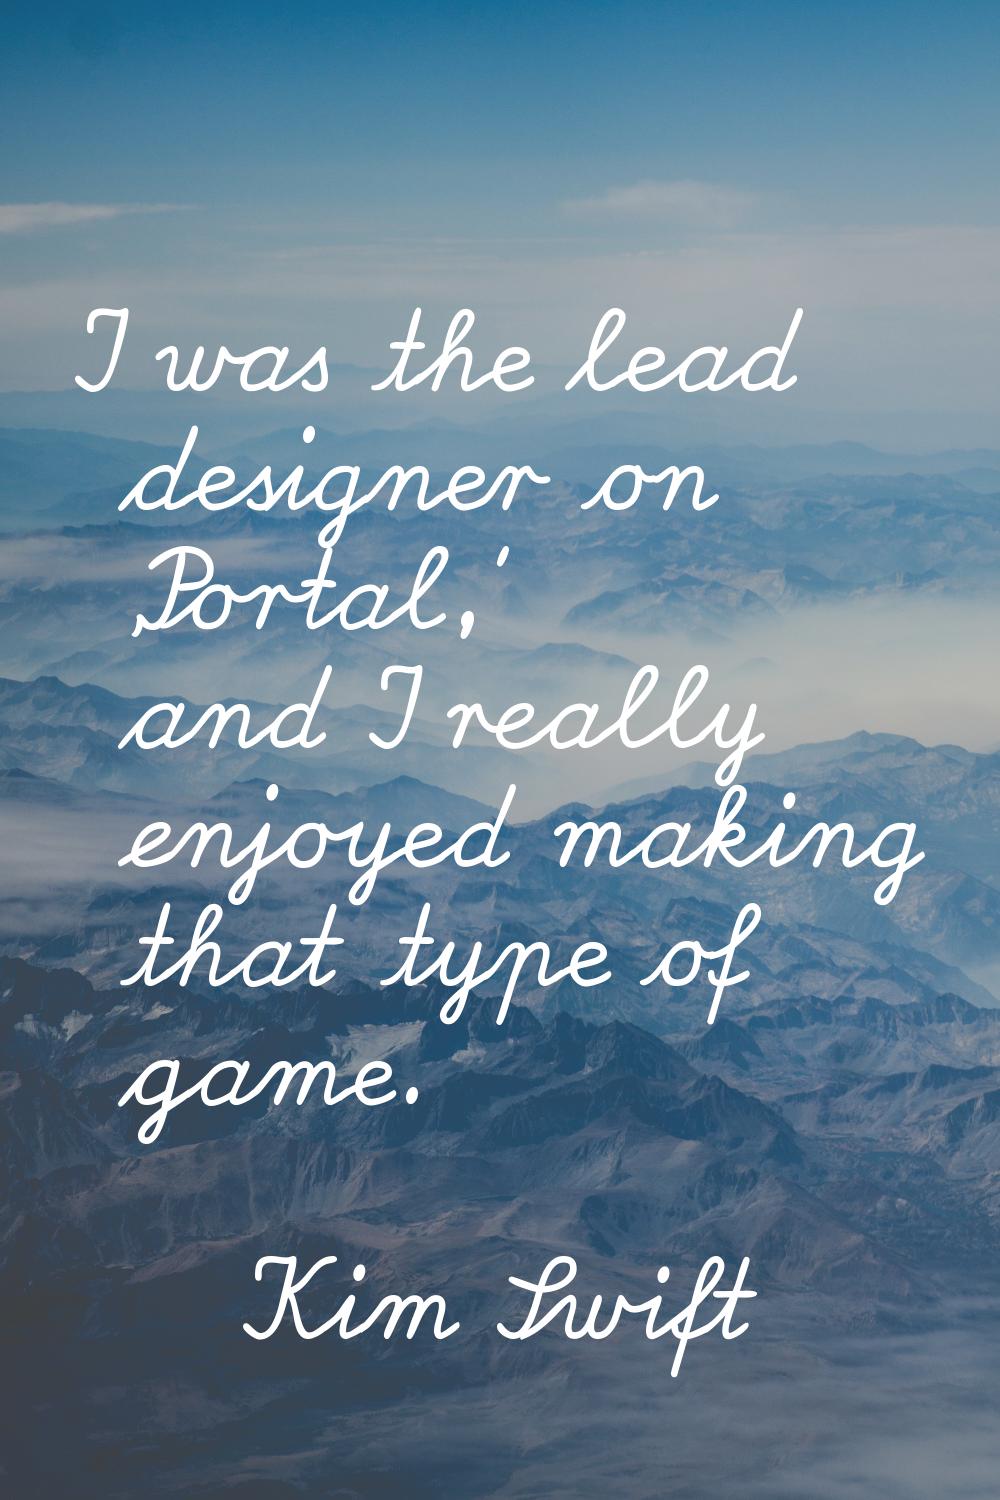 I was the lead designer on 'Portal,' and I really enjoyed making that type of game.